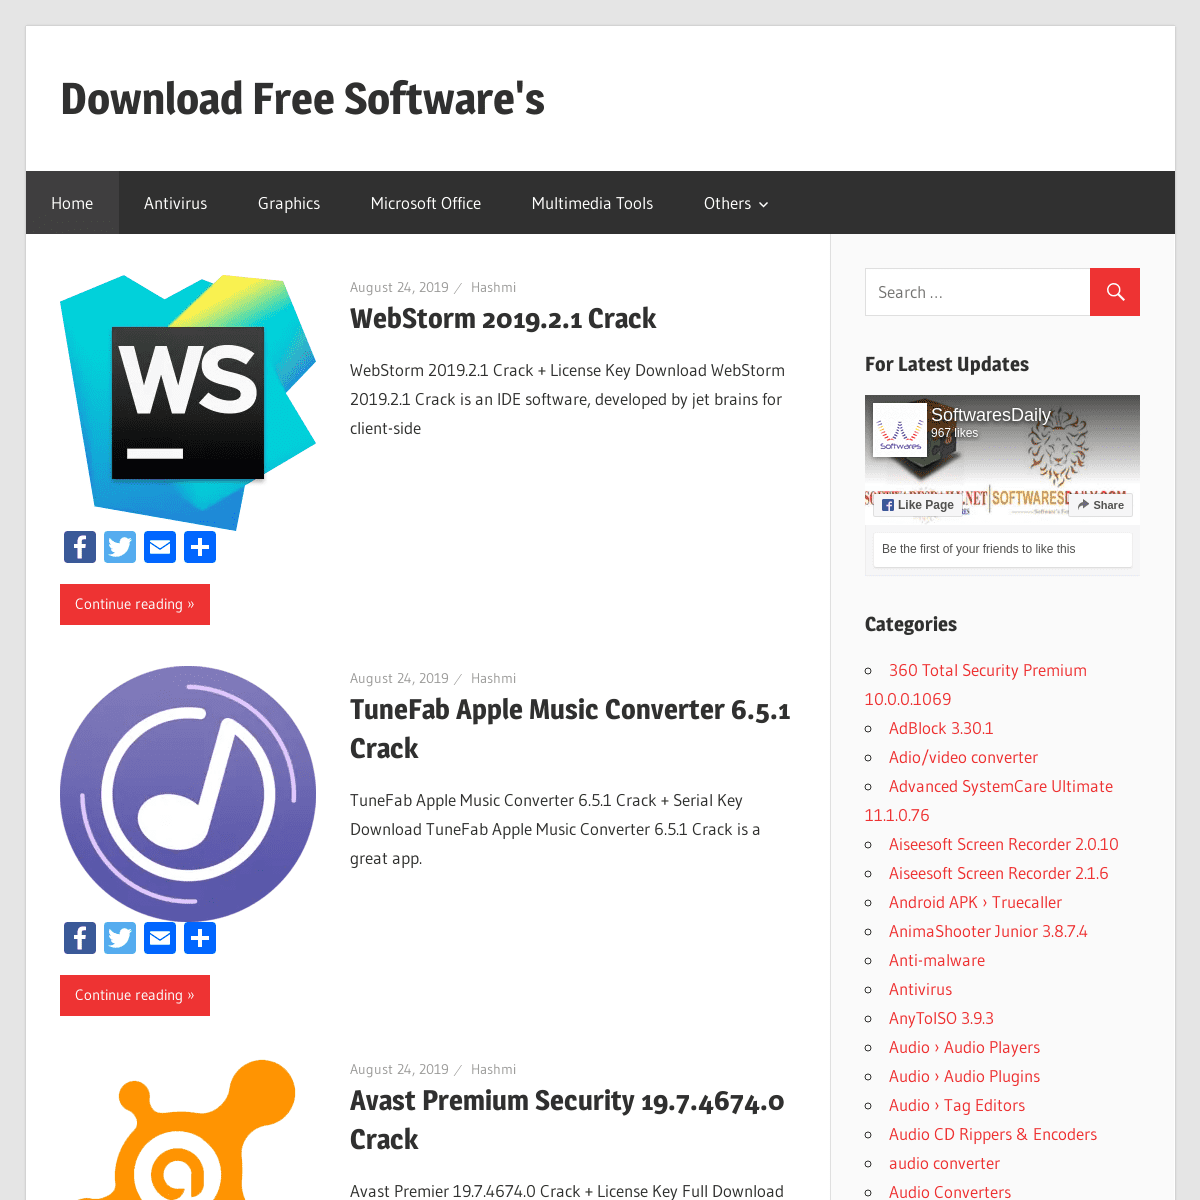 Download Free Software's - Free Software's